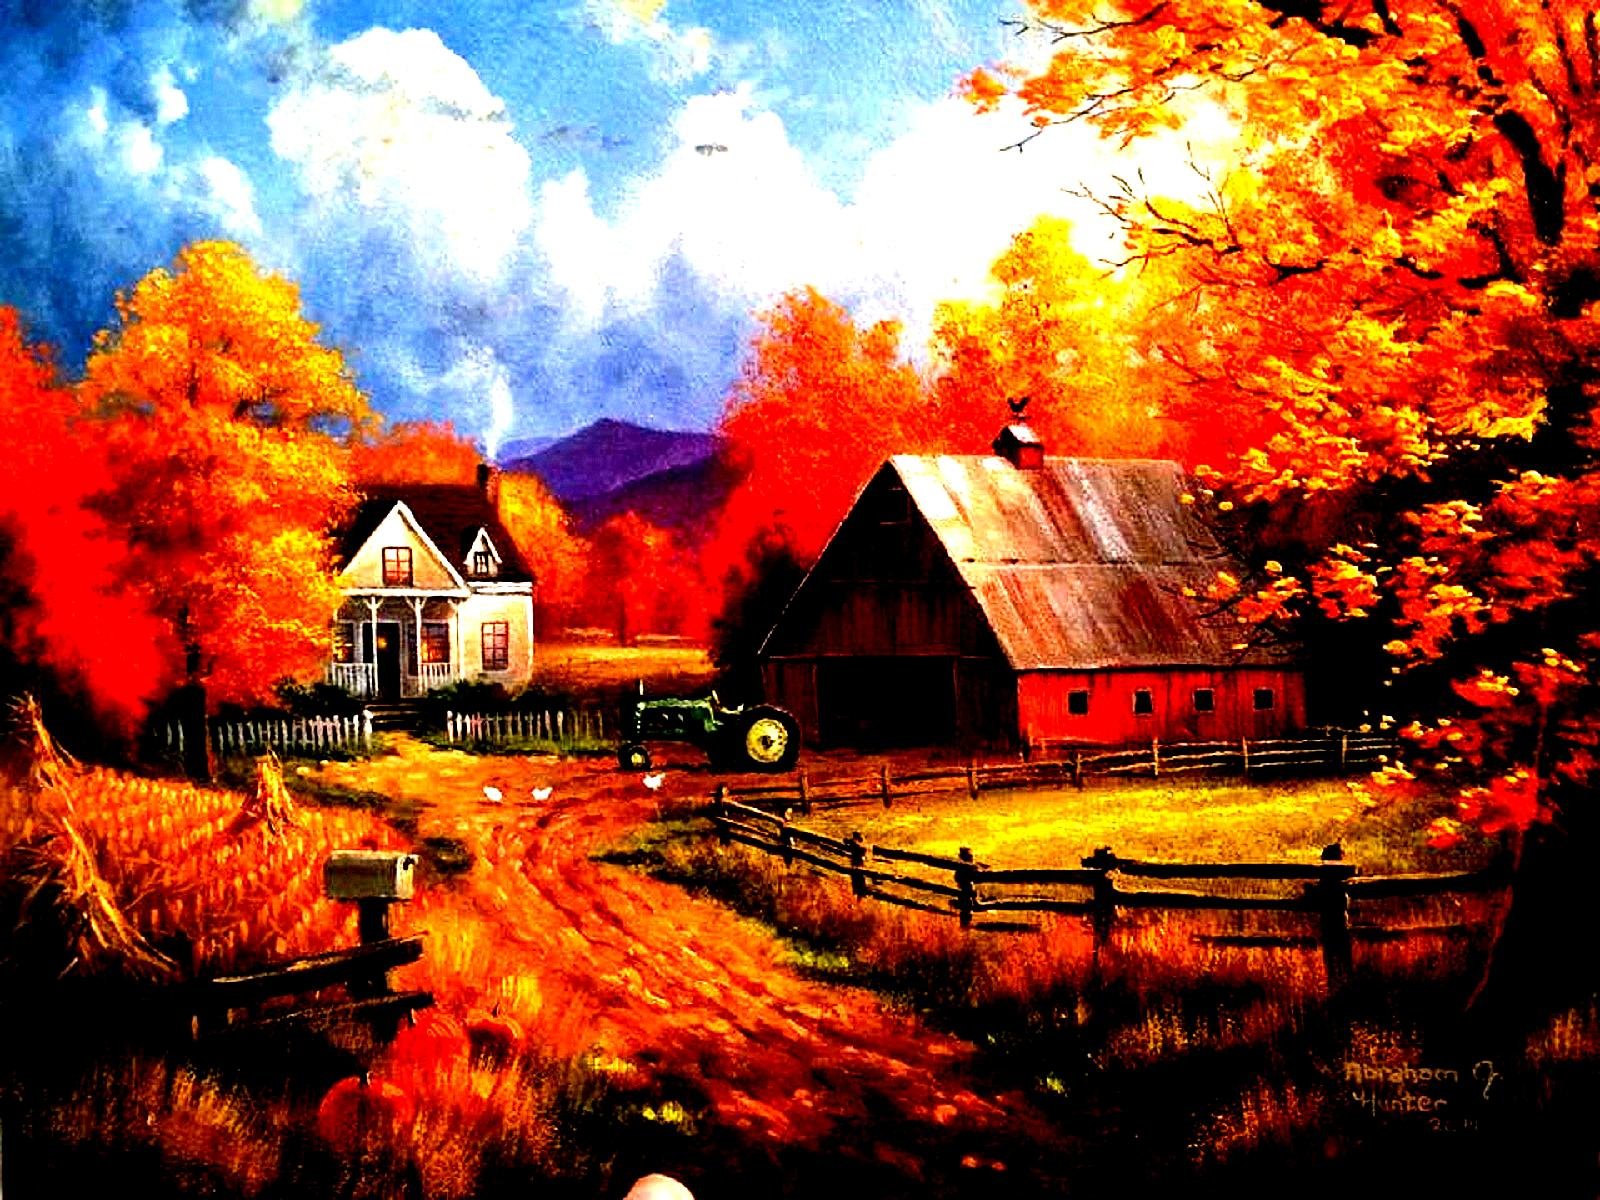 autumn, Fall, Landscape, Nature, Tree, Forest, Leaf, Leaves, Farm, House, Tractor, Rustic, Artwork Wallpaper